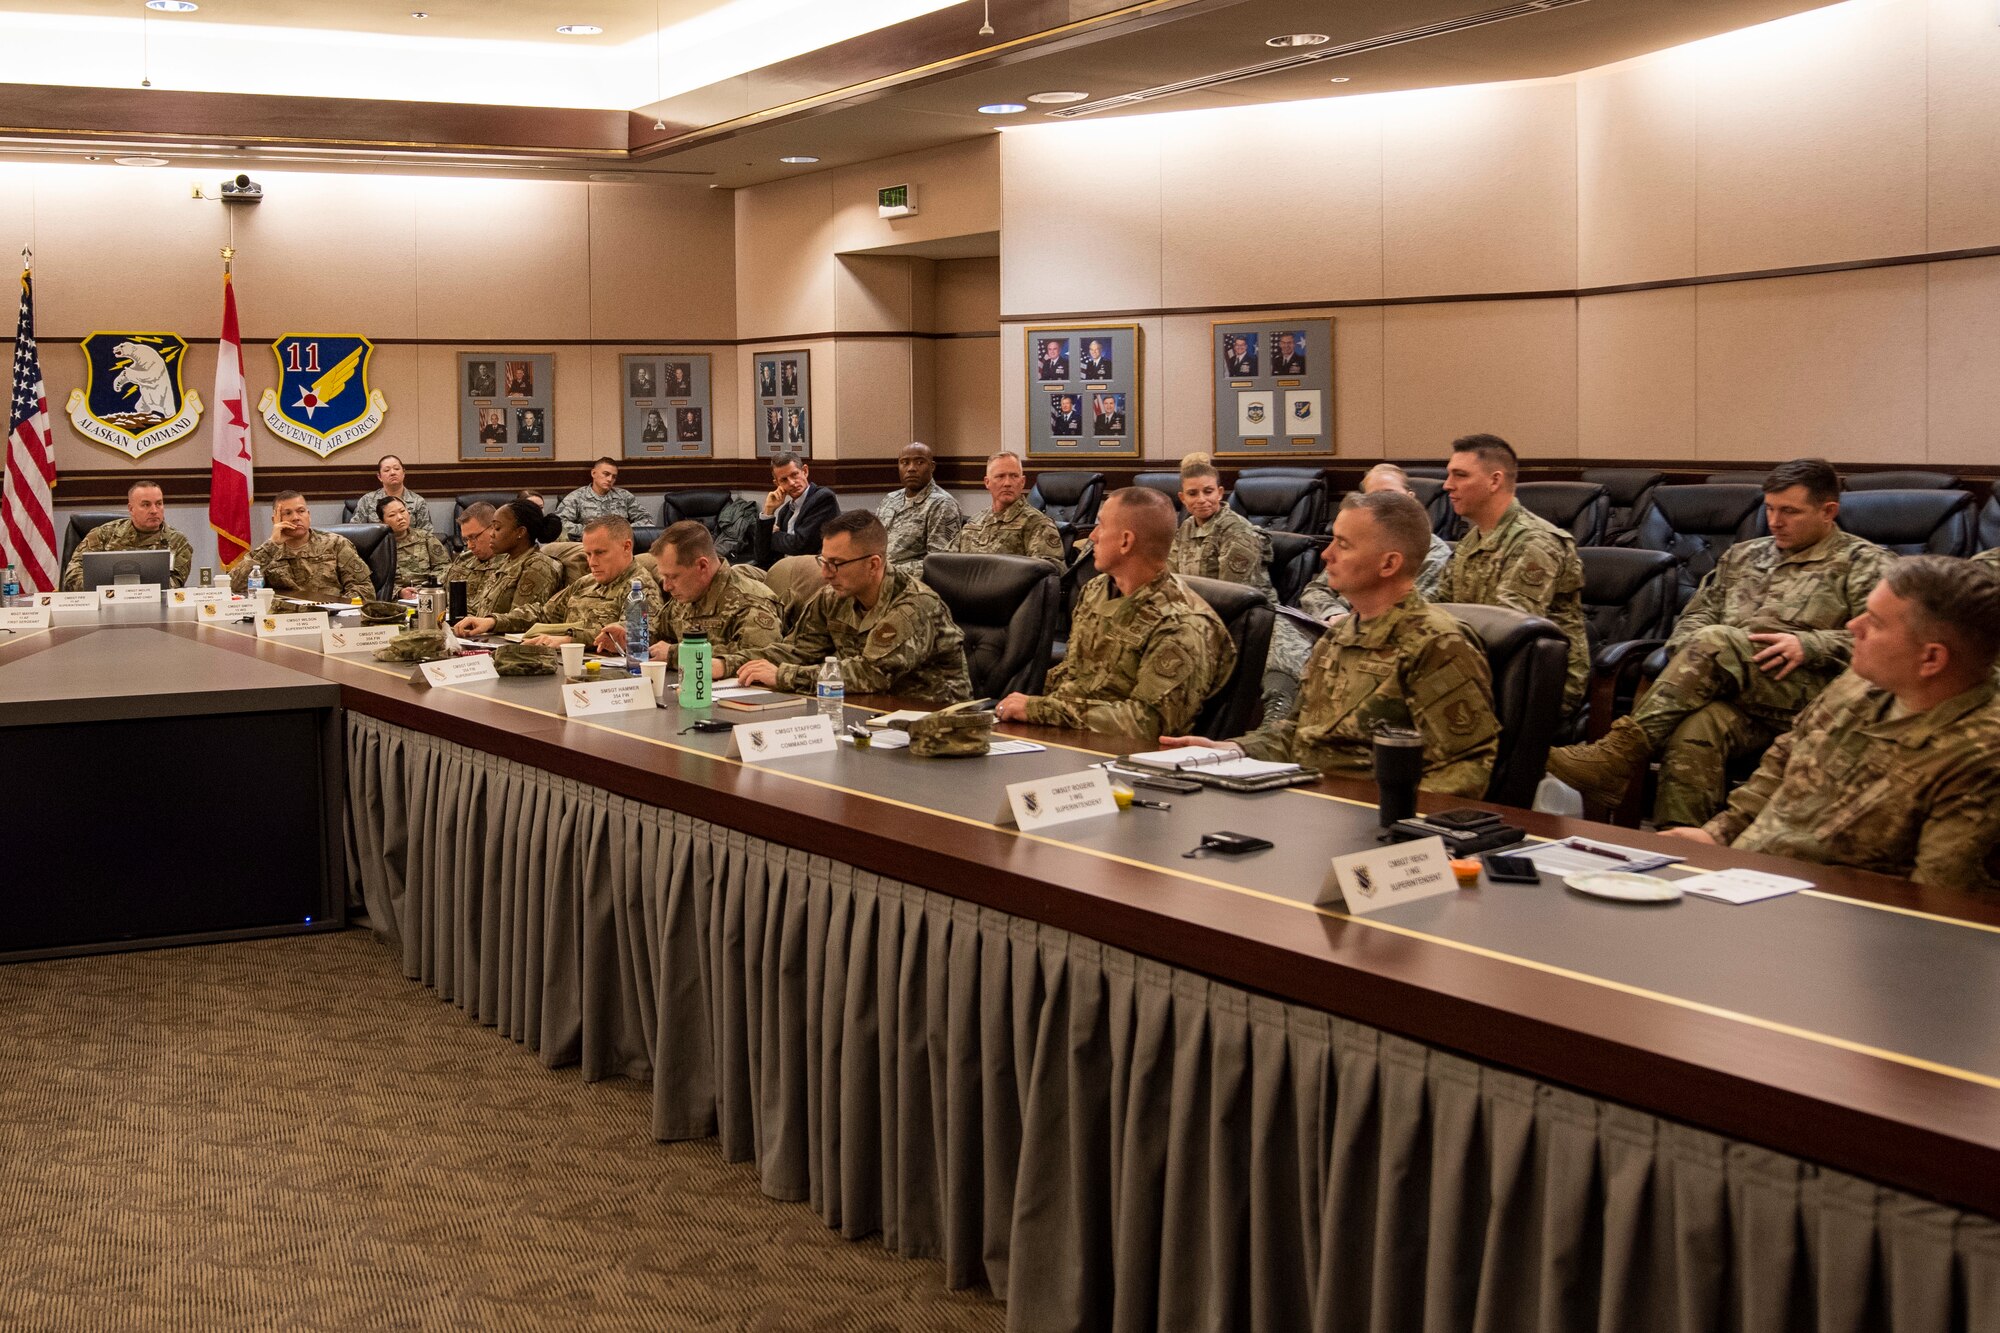 The Eleventh Air Force holds a two-day workshop for its senior enlisted leaders and civilians at Joint Base Elmendorf-Richardson, Alaska, Nov. 6, 2019. More than 40 attendees from Alaska, Hawaii and Guam discussed topics on resiliency and best practices in operating a wing.